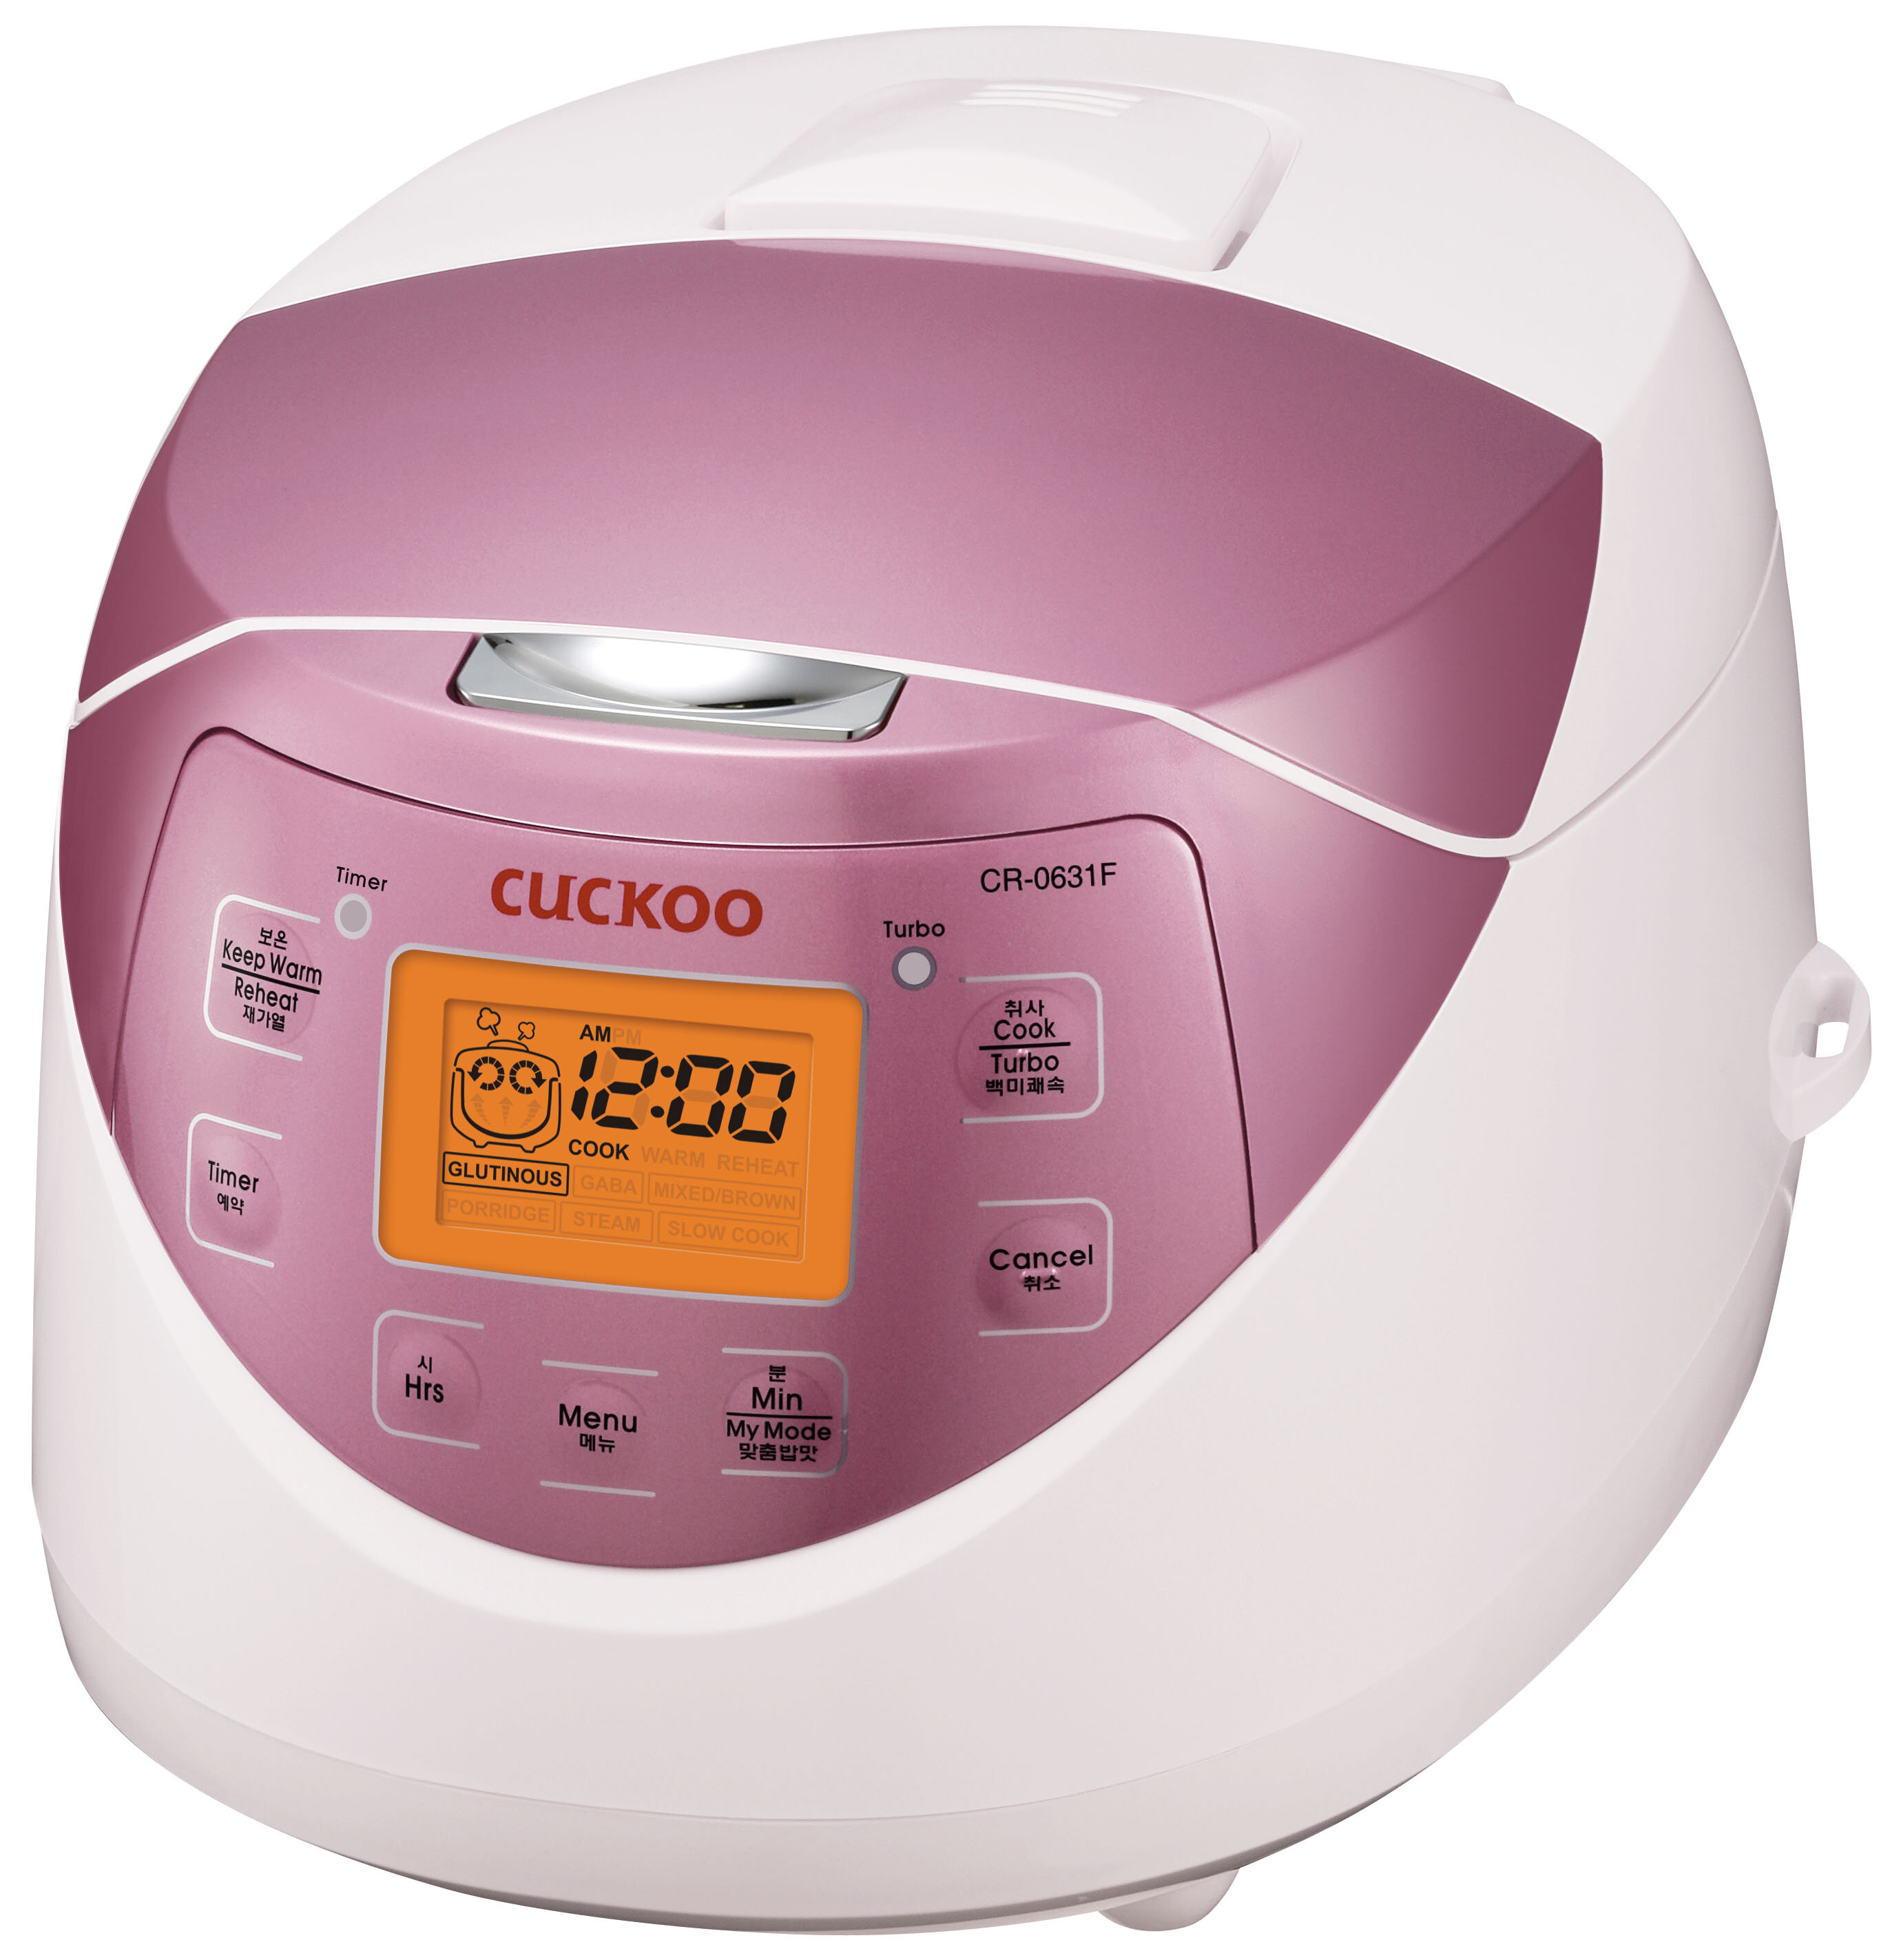 CUCKOO Heating Plate 2019 Dec New Model Pressure Rice Cooker with Multi Cooking Function HP